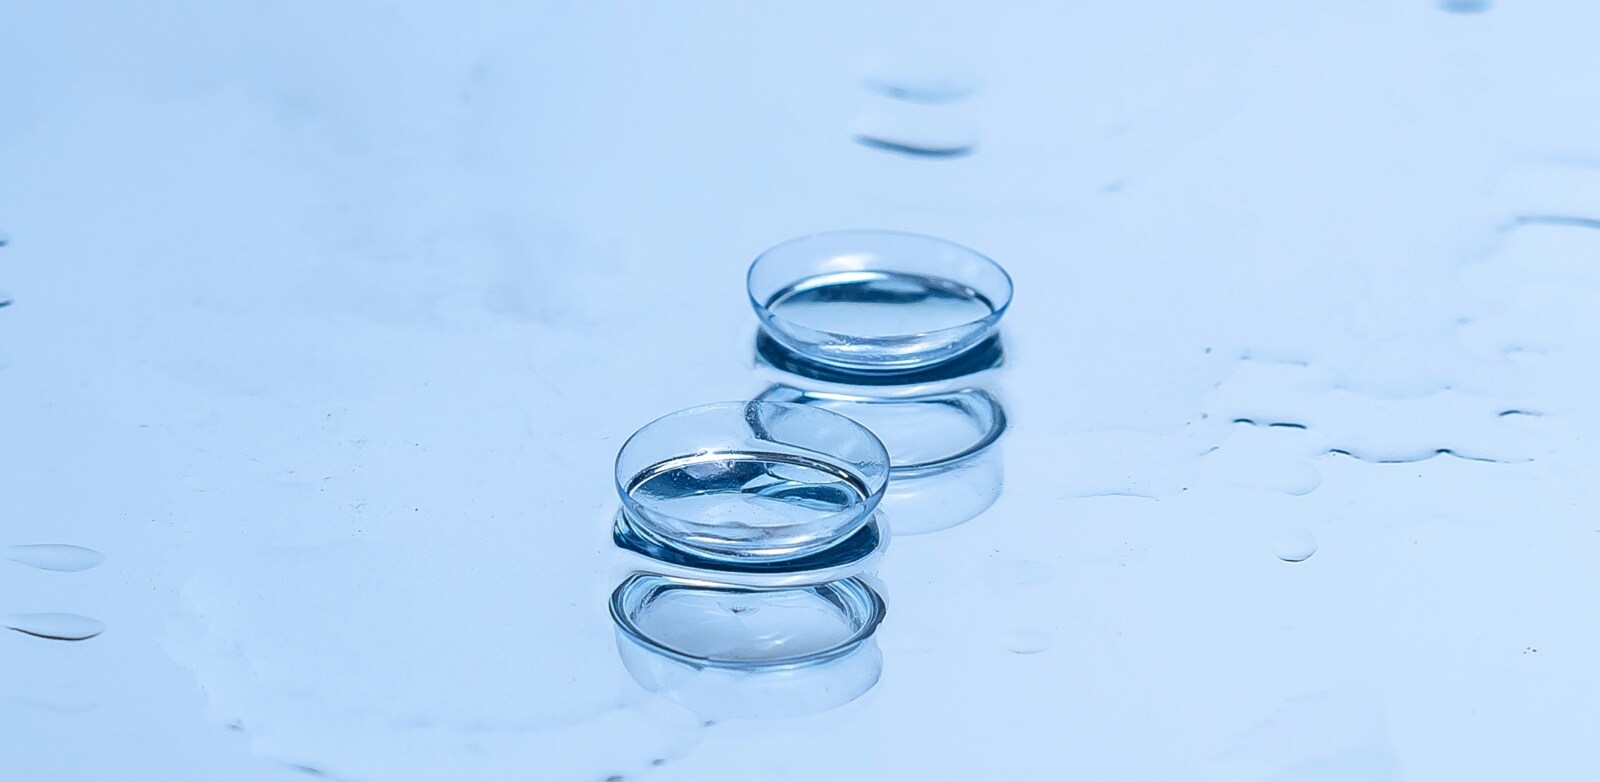 Contact lenses material: what are contacts made of?